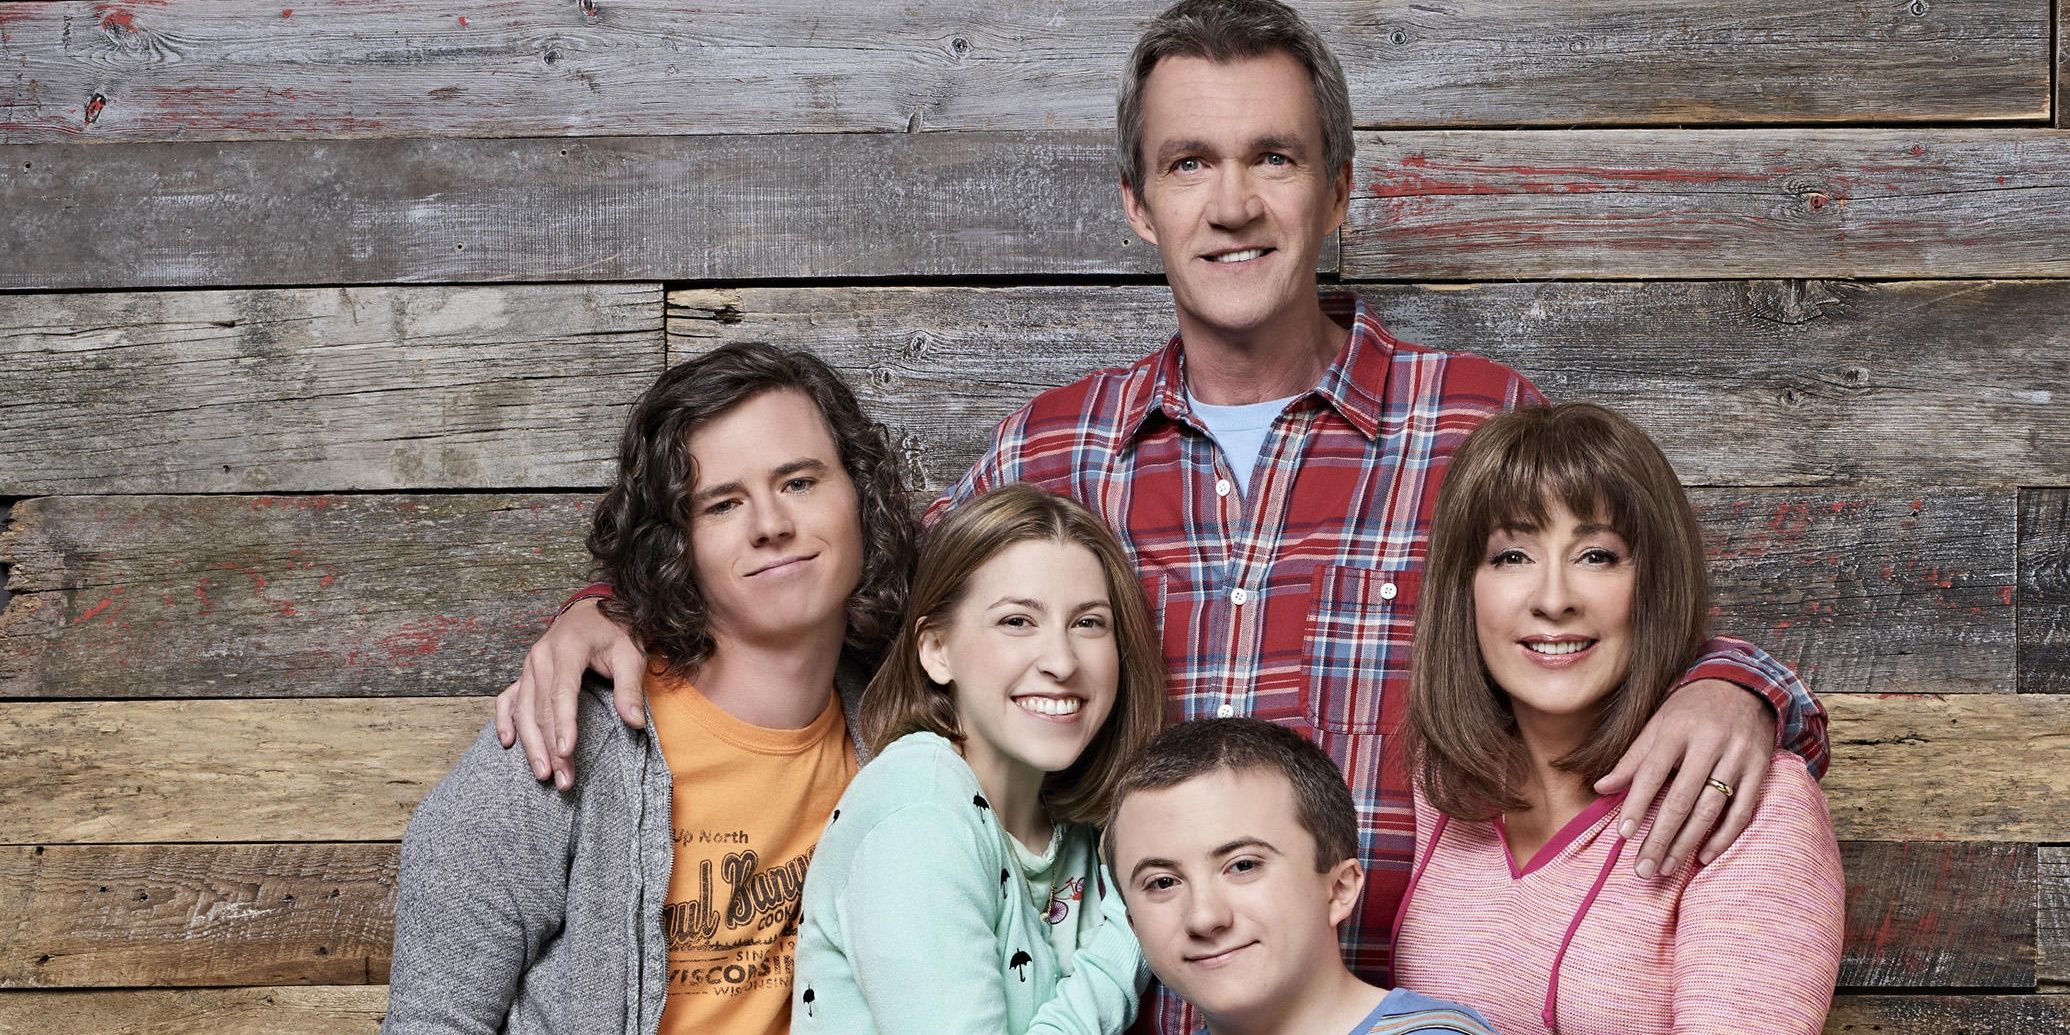 The lead cast of The Middle standing together